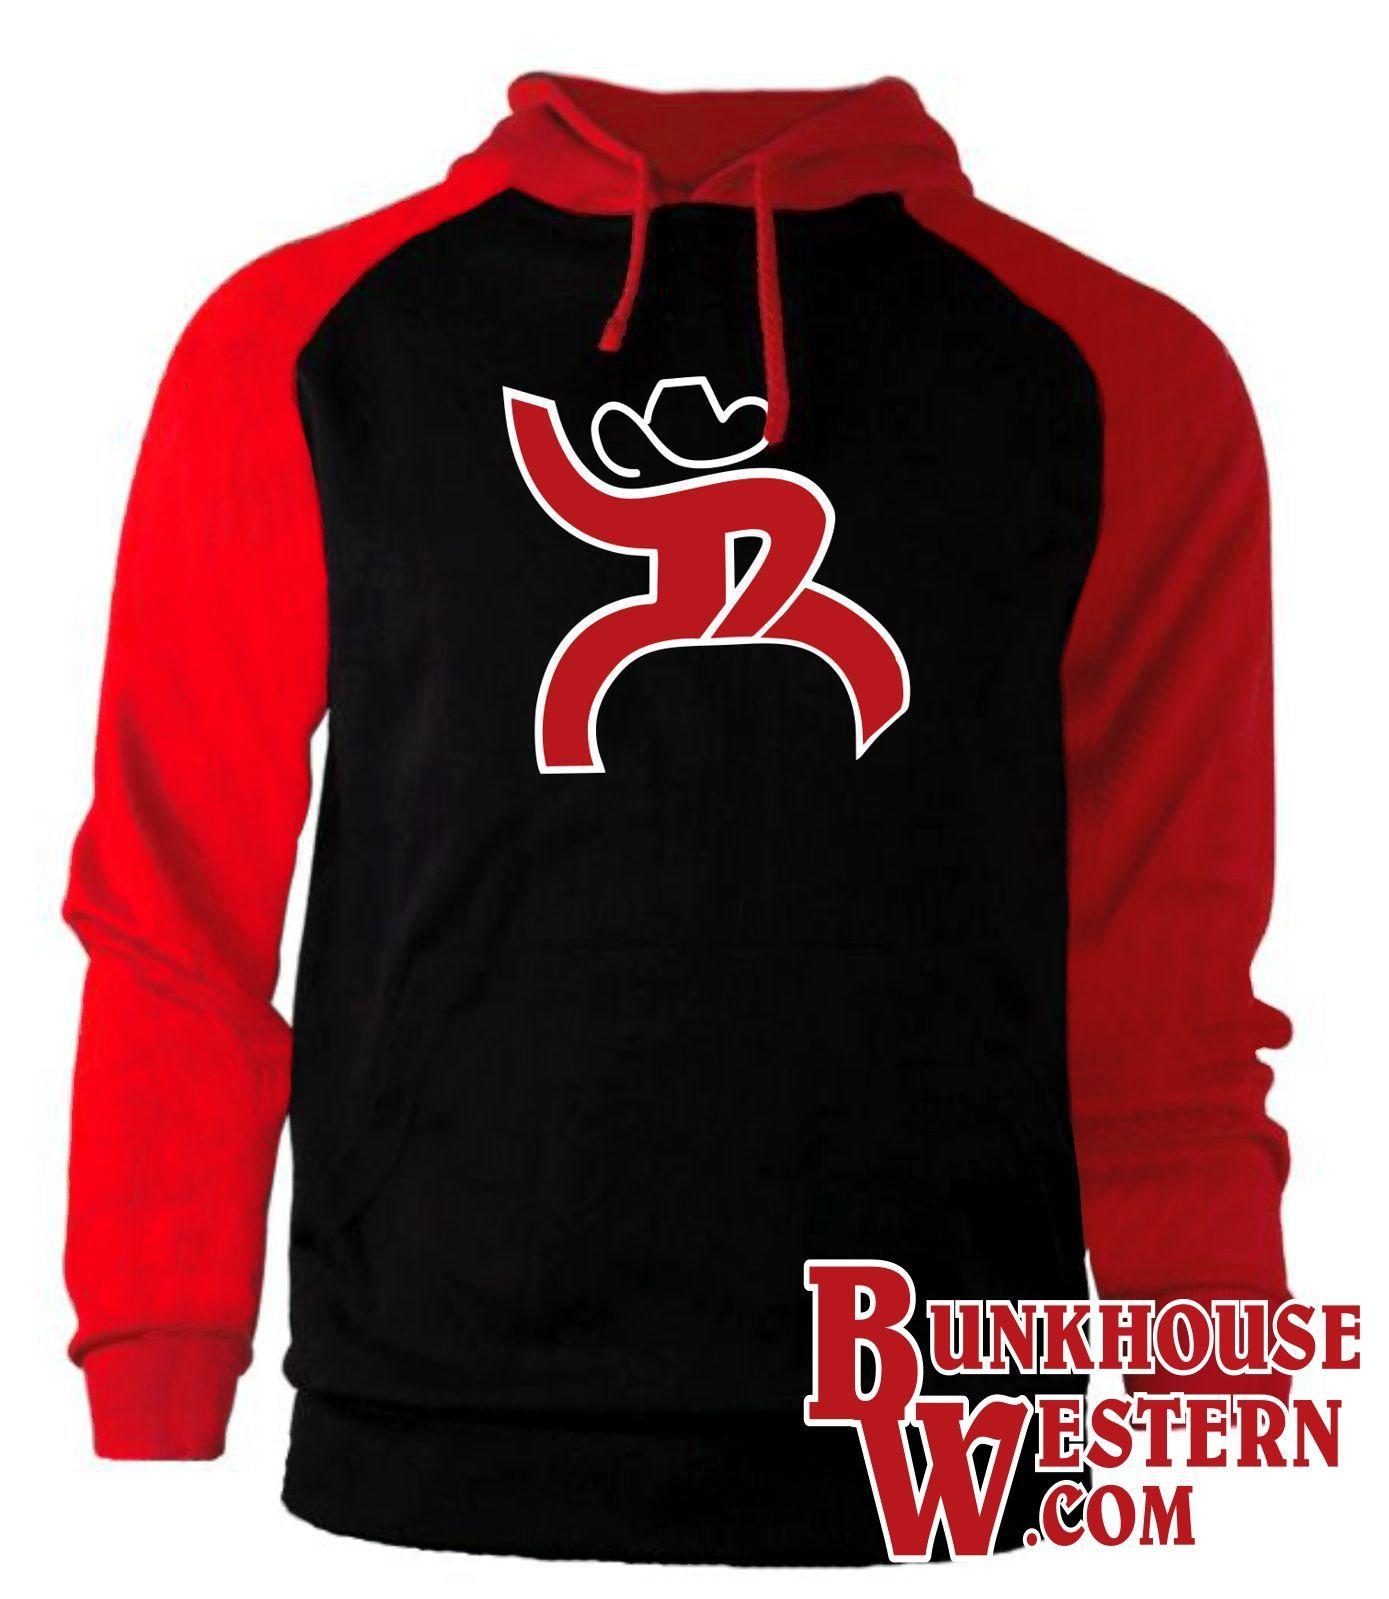 Red and Black Western Logo - Black & Red Roughy Mo Sweatshirt (S & 2XL only). Hooey